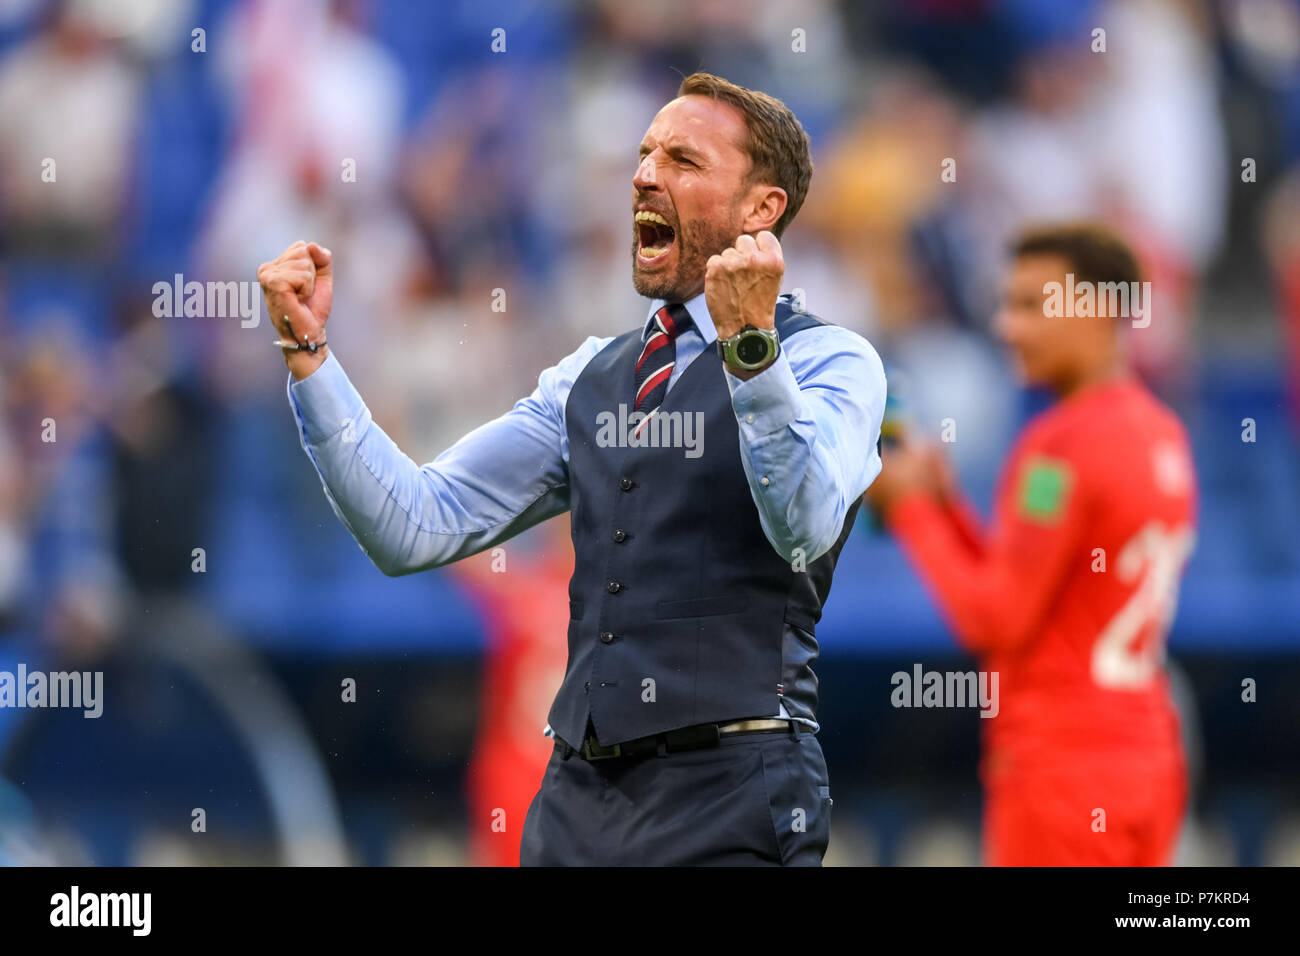 Samara, Russia. 7th July 2018.  Gareth Southgate celebrating the victory at Samara Stadium during the quarter final between England and Sweden during the 2018 World Cup. Ulrik Pedersen/CSM Credit: Cal Sport Media/Alamy Live News Stock Photo